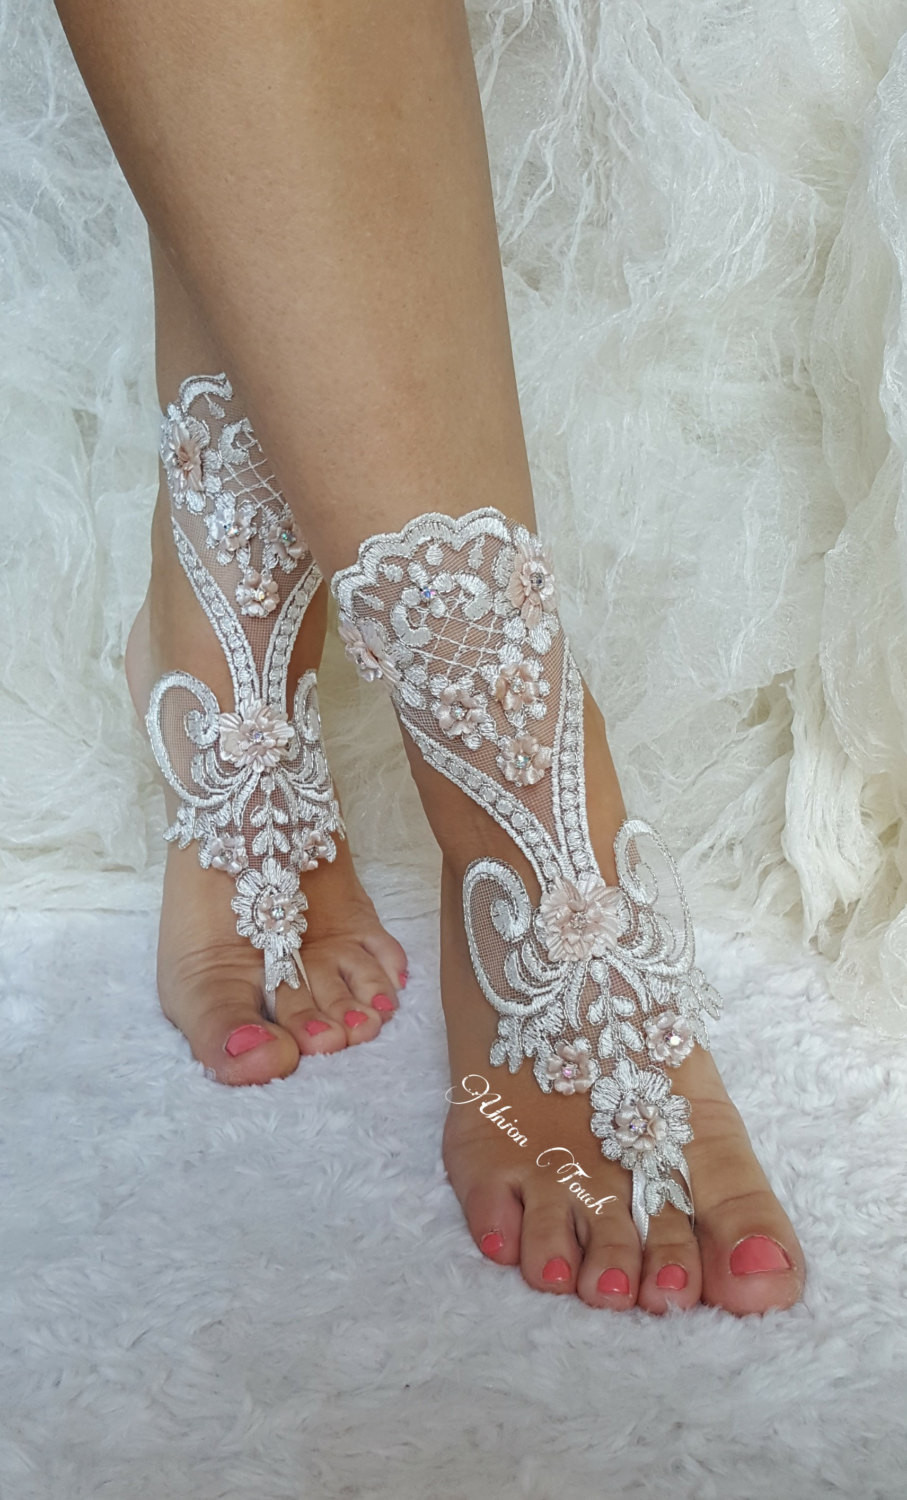 Wedding Beach Shoes
 Ivory Silver Lace Barefoot Beach wedding barefoot sandals